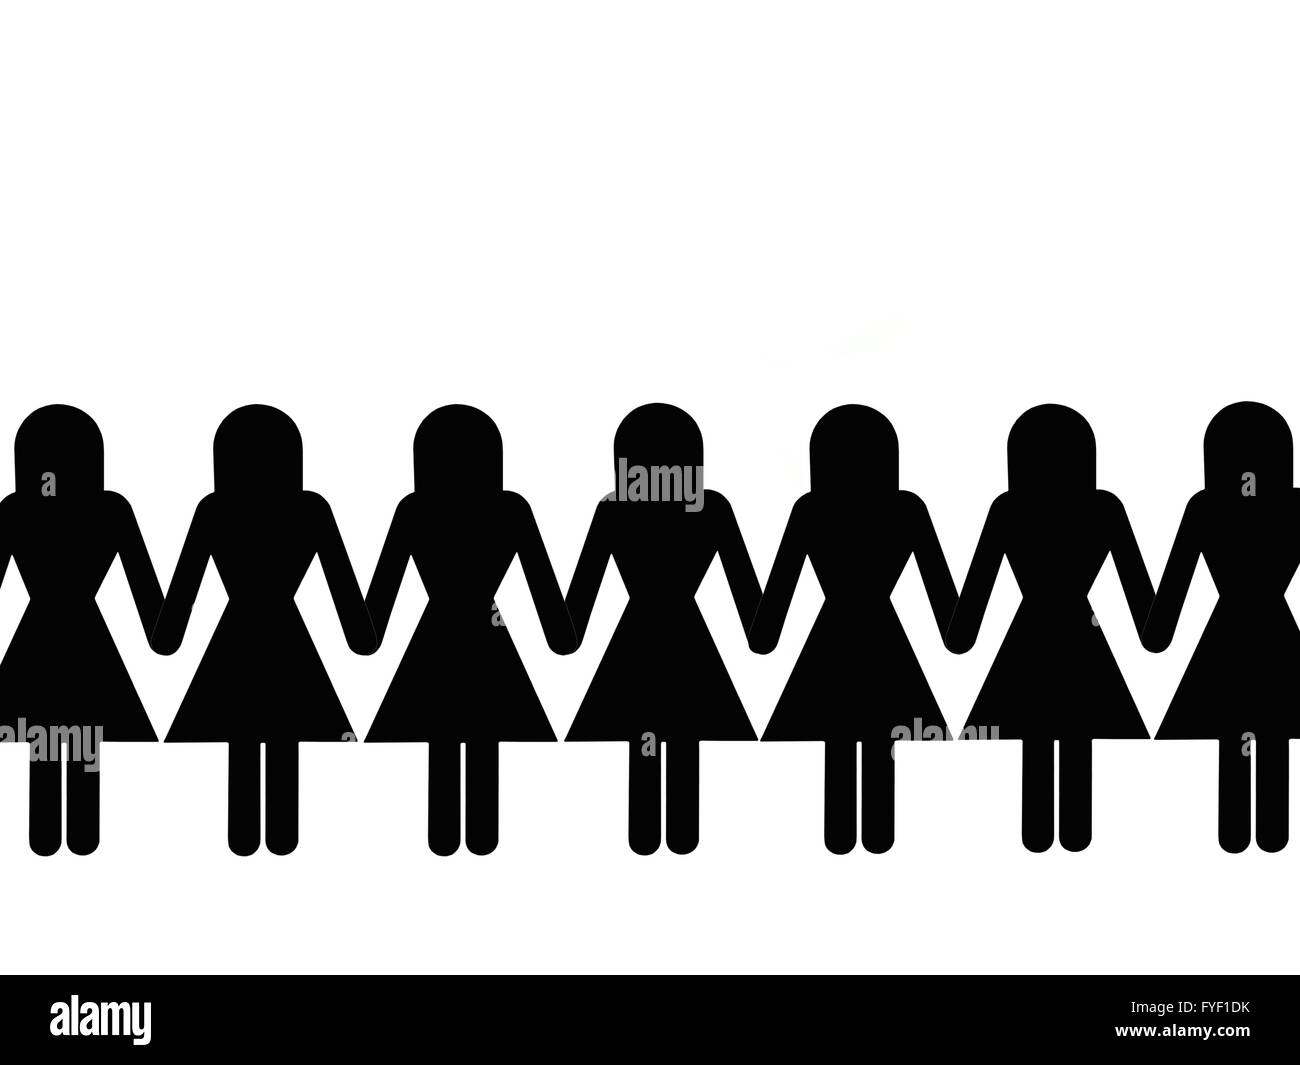 Female cutout figurines isolated against a black background Stock Photo